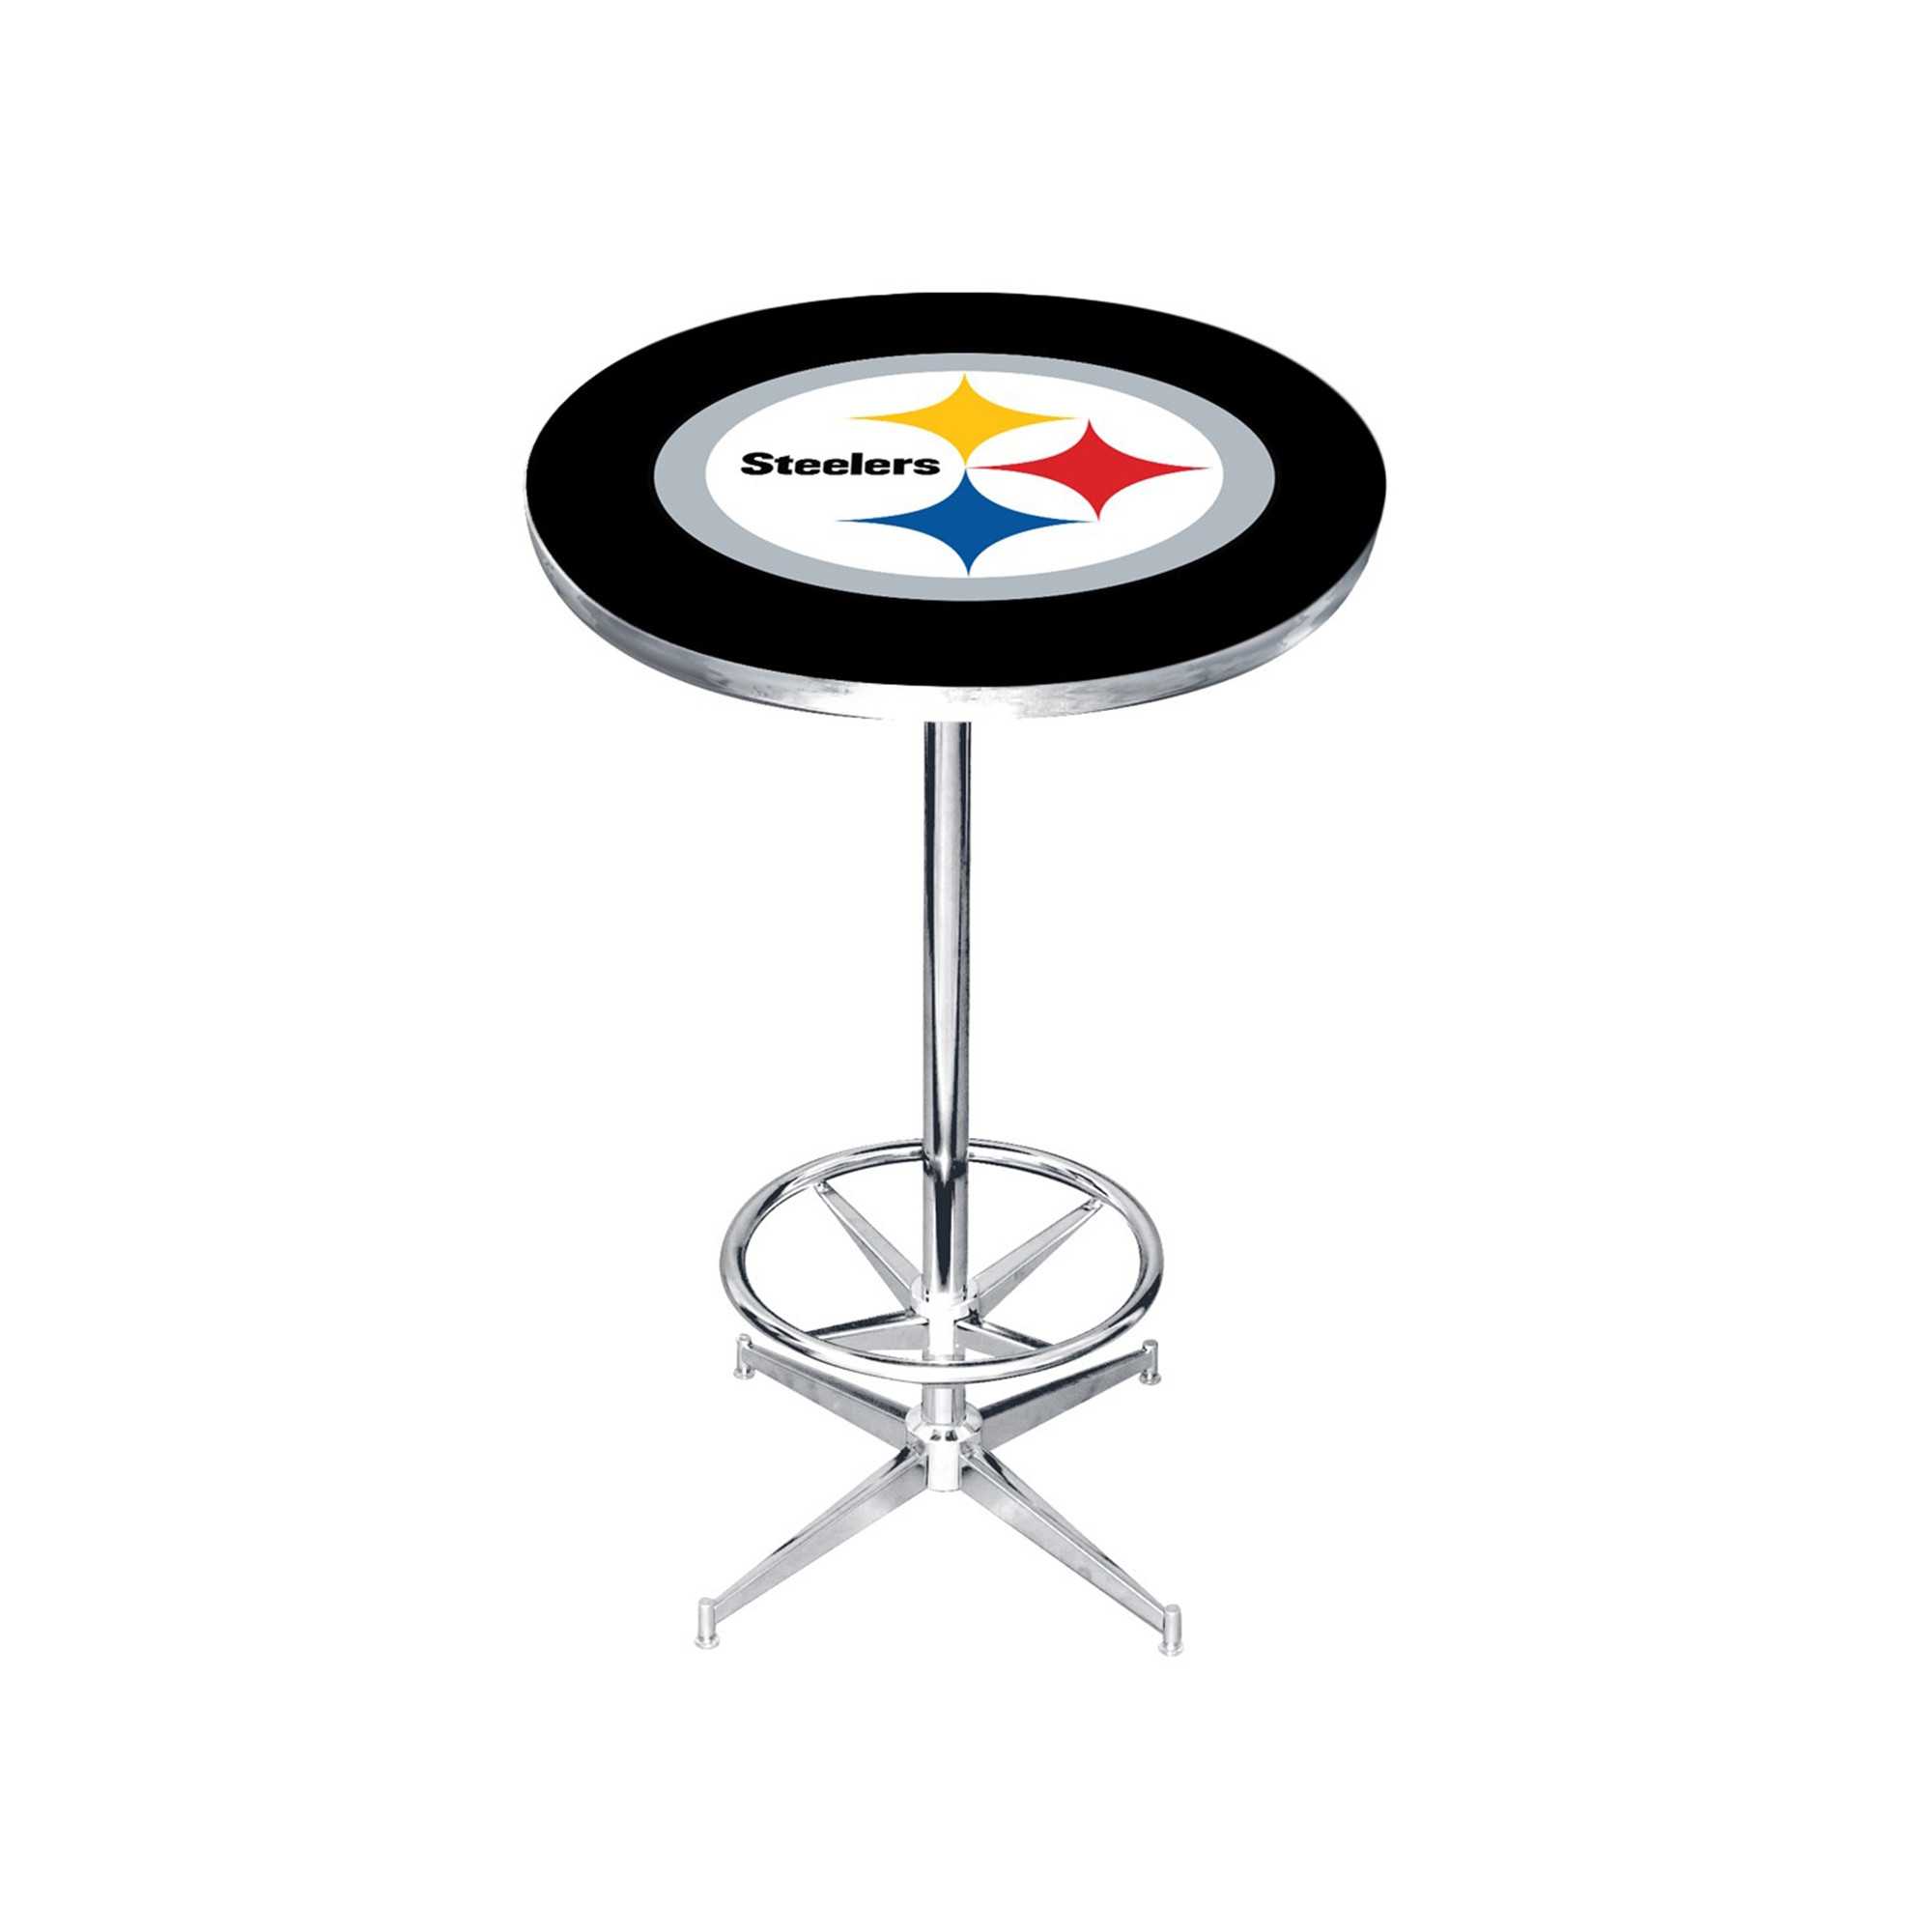 PITTS STEELERS PUB TABLE